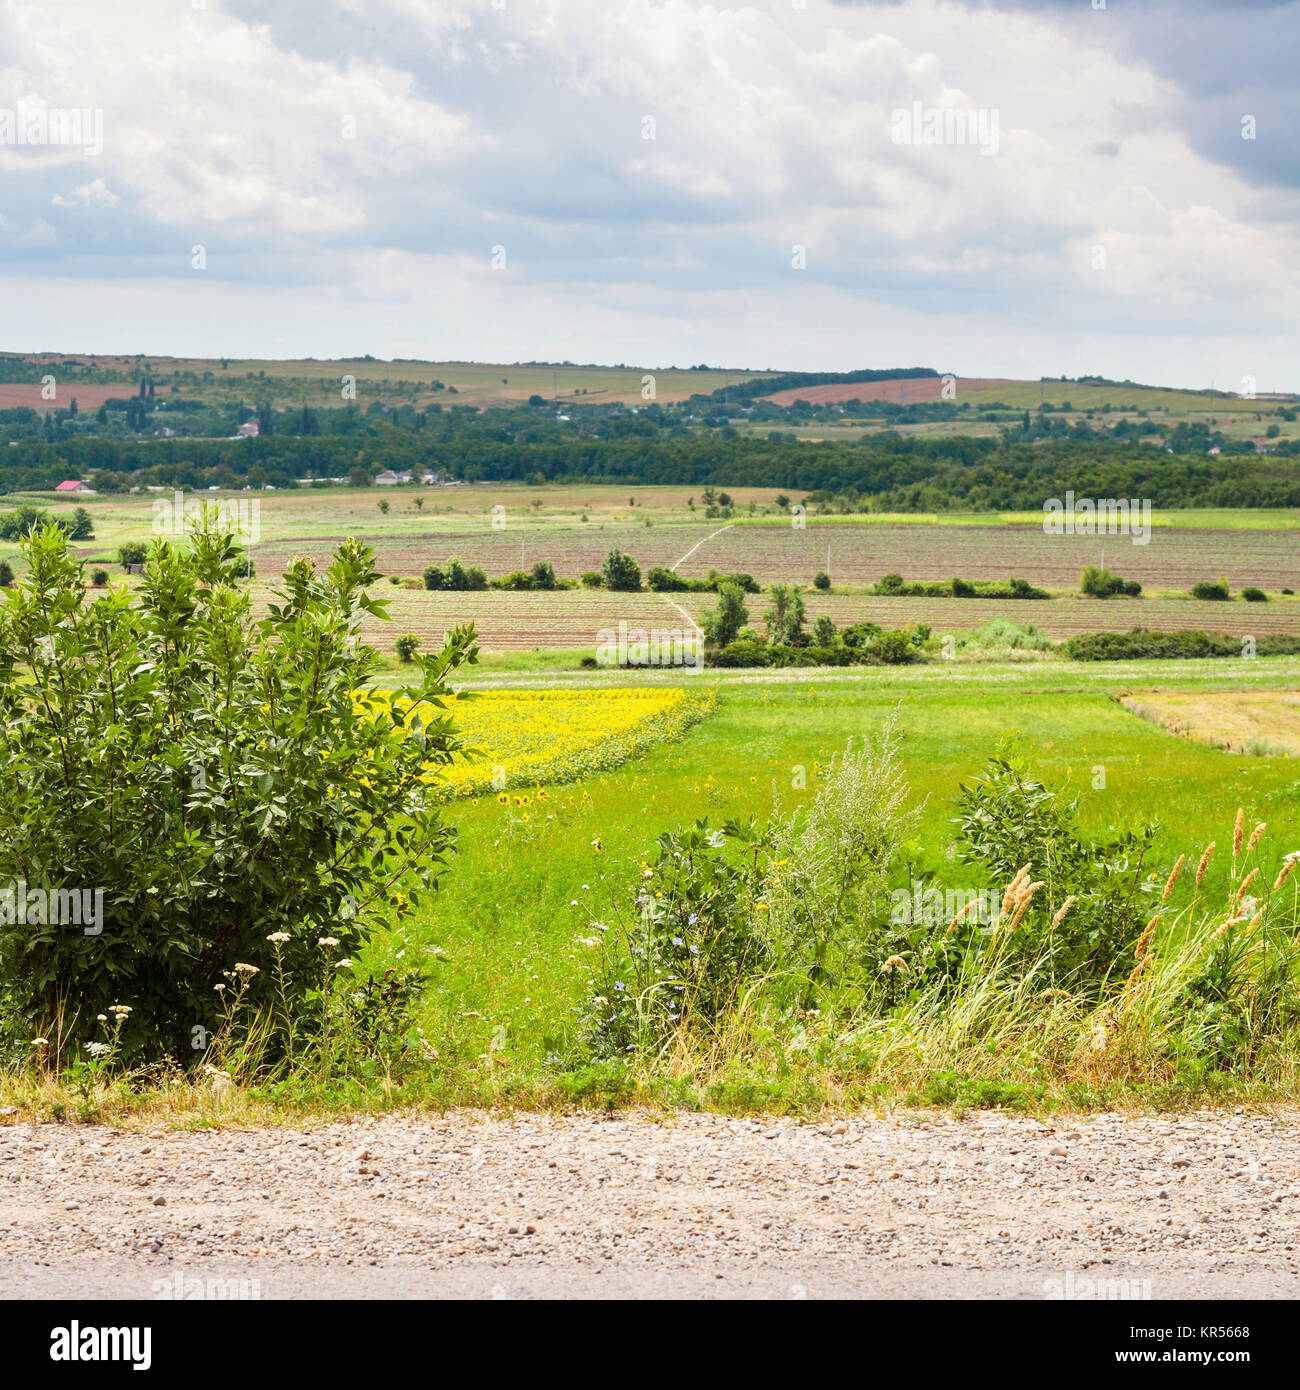 country landscape with road, fields and village Stock Photo